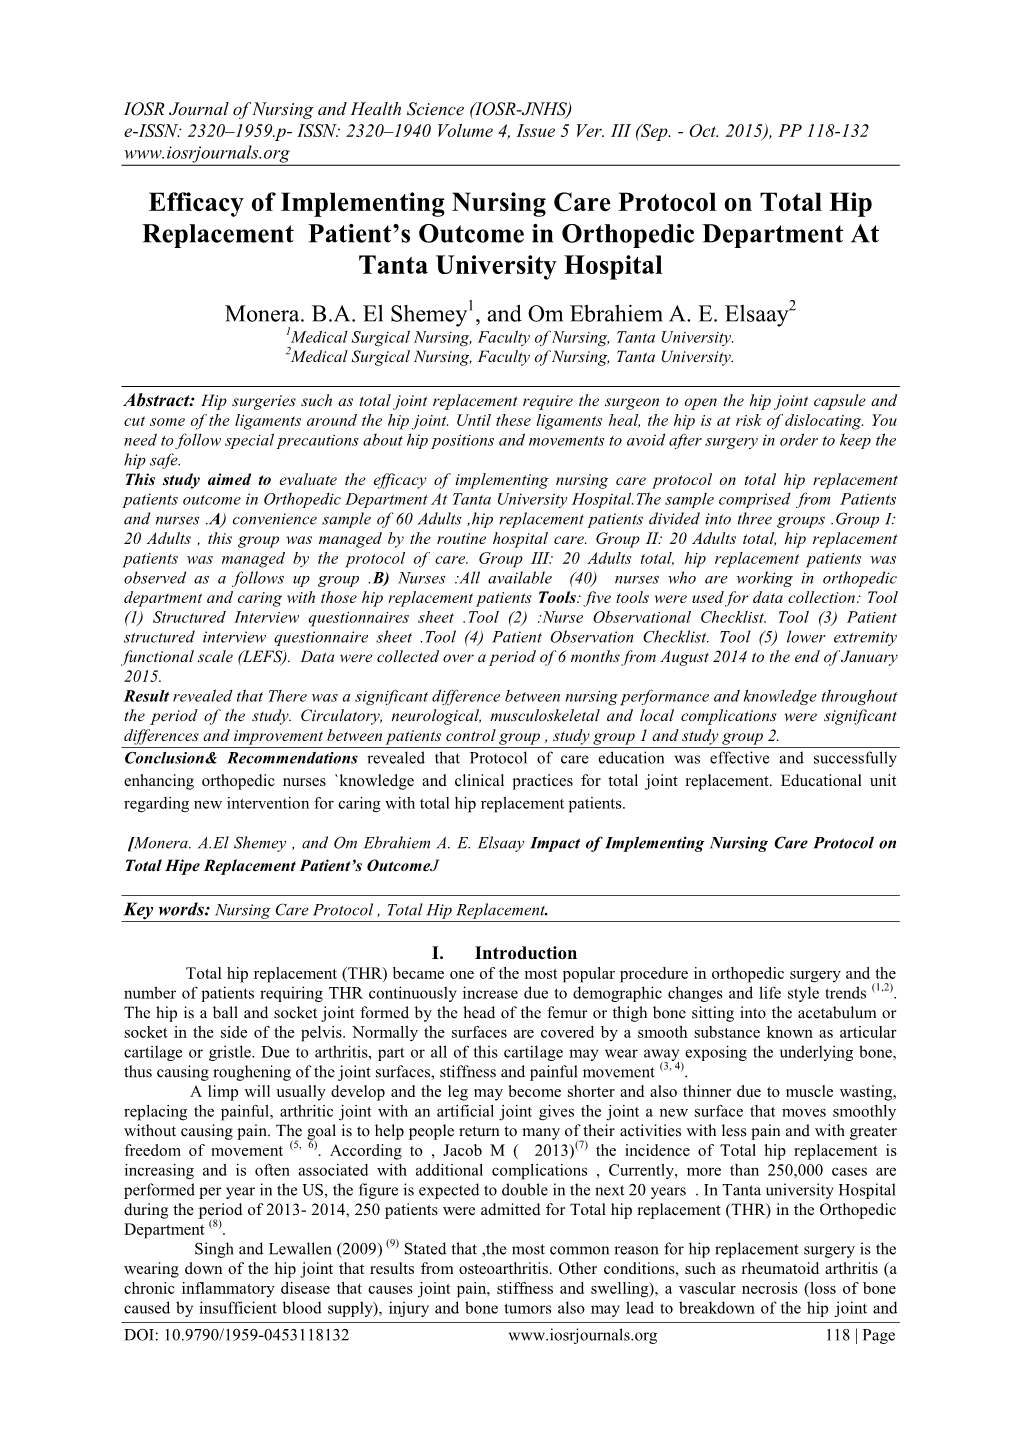 Efficacy of Implementing Nursing Care Protocol on Total Hip Replacement Patient’S Outcome in Orthopedic Department at Tanta University Hospital